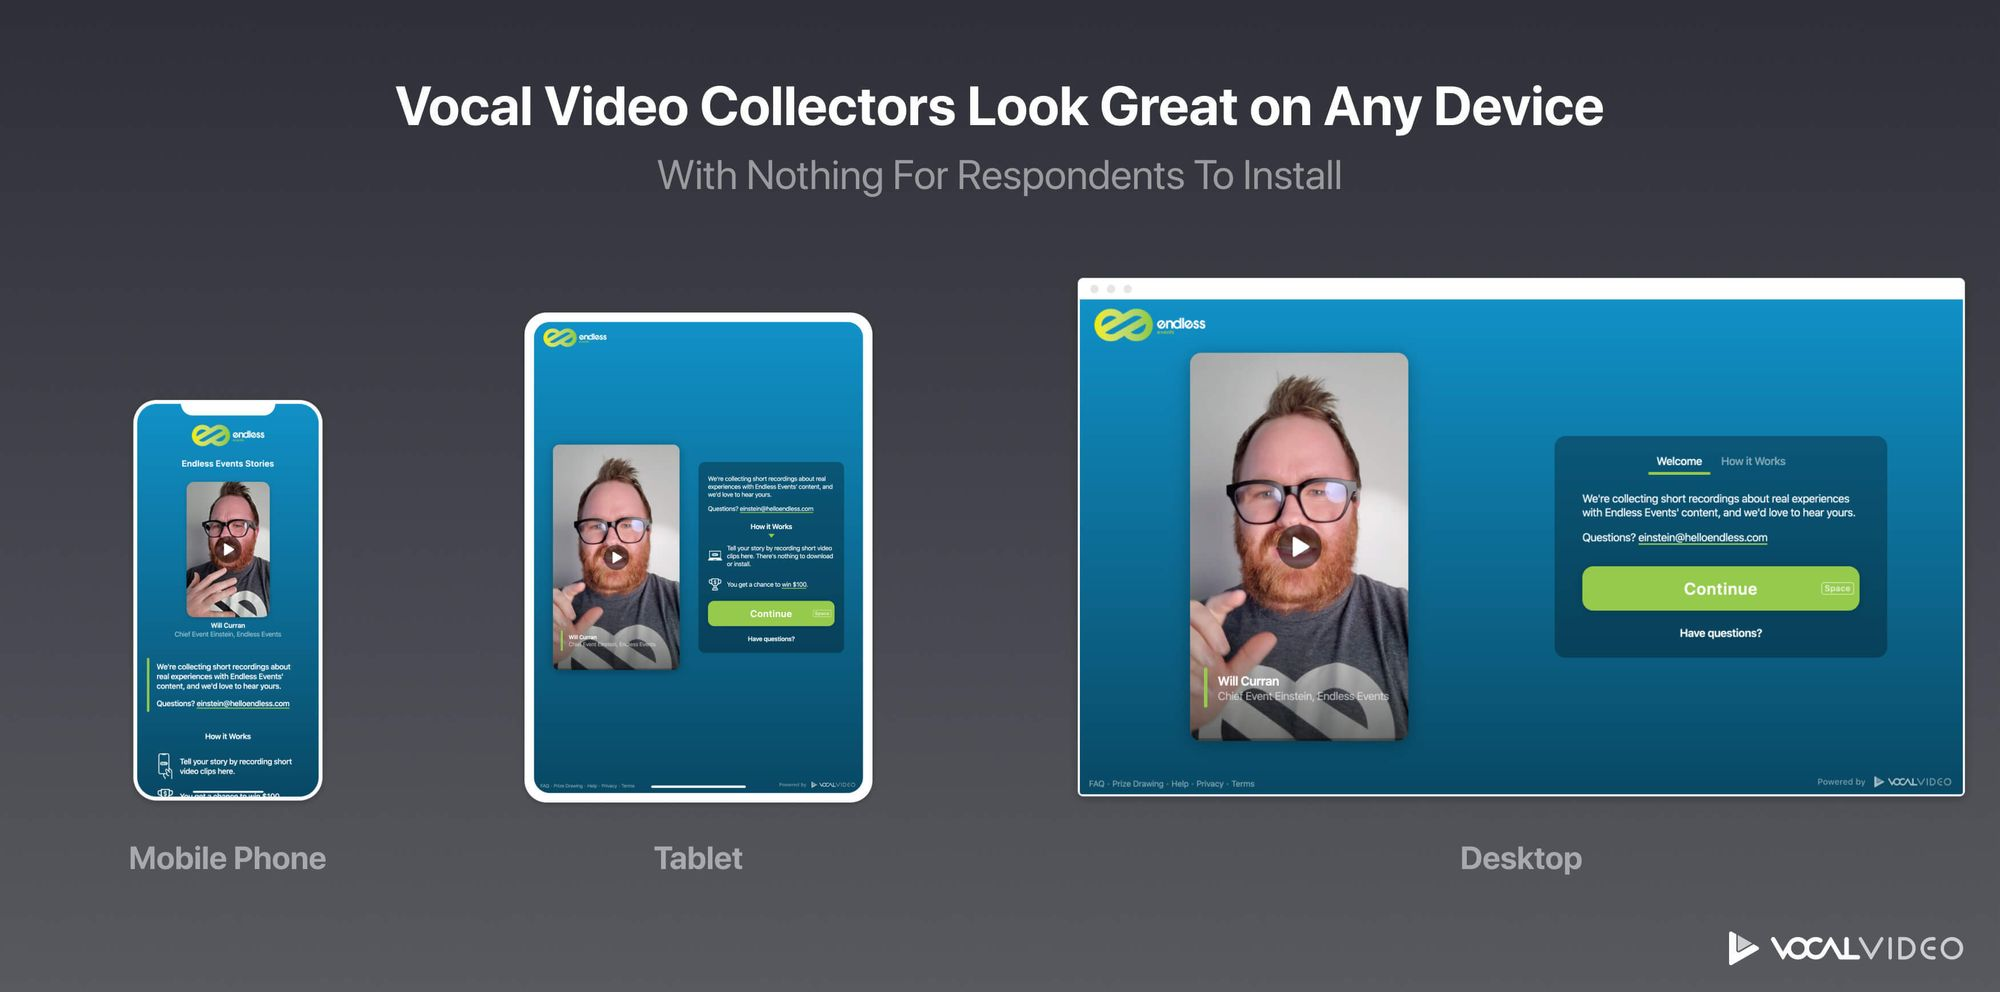 Vocal Video Collectors Look Great on Any Device